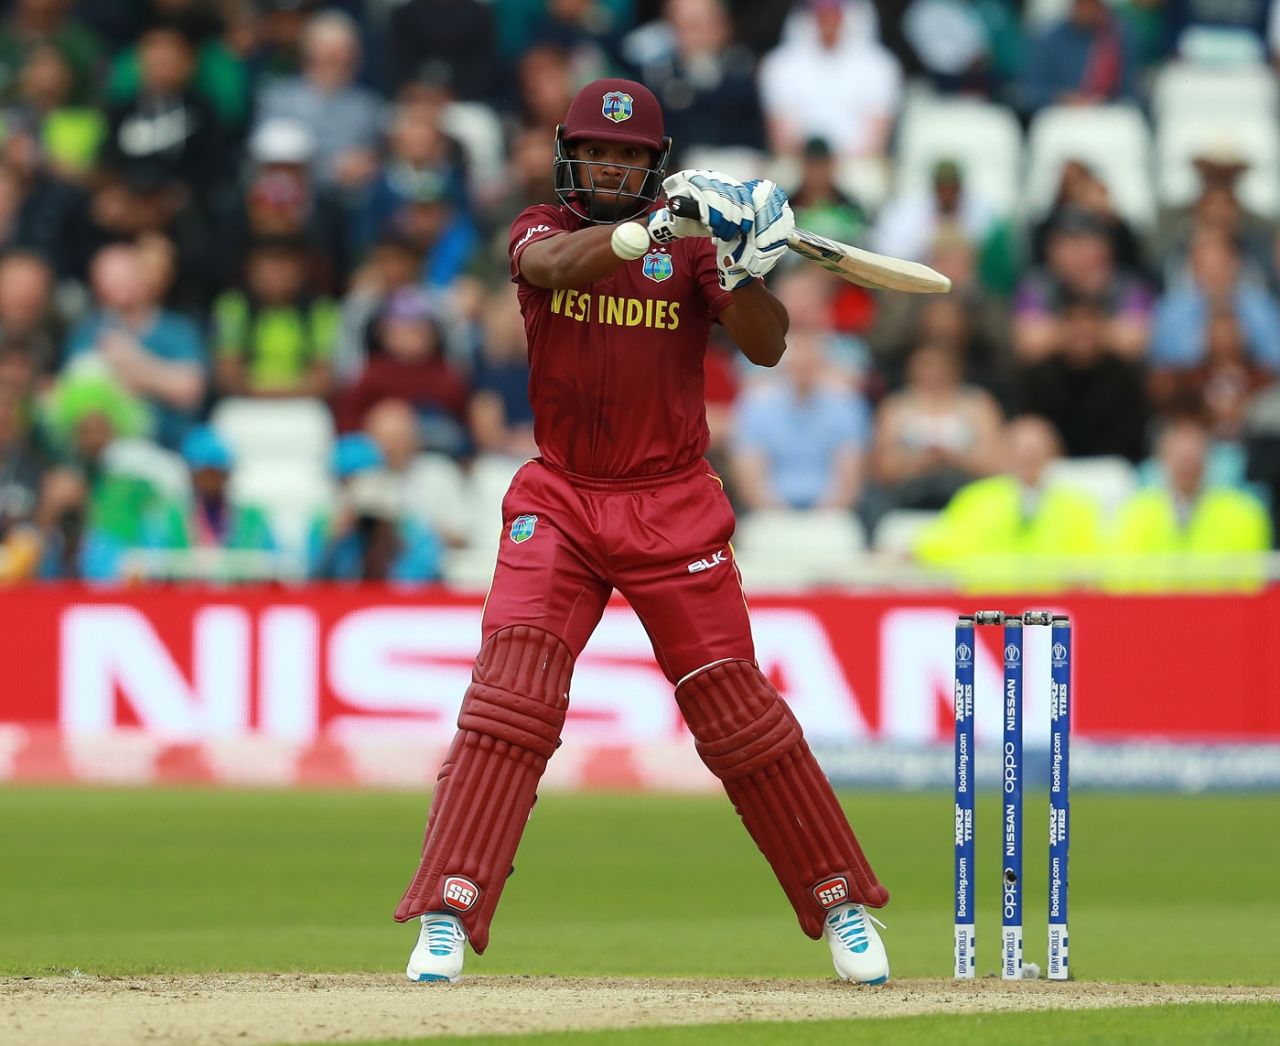 Nicholas Pooran seals the win with a six, Pakistan v West Indies, World Cup 2019, Trent Bridge, May 31, 2019